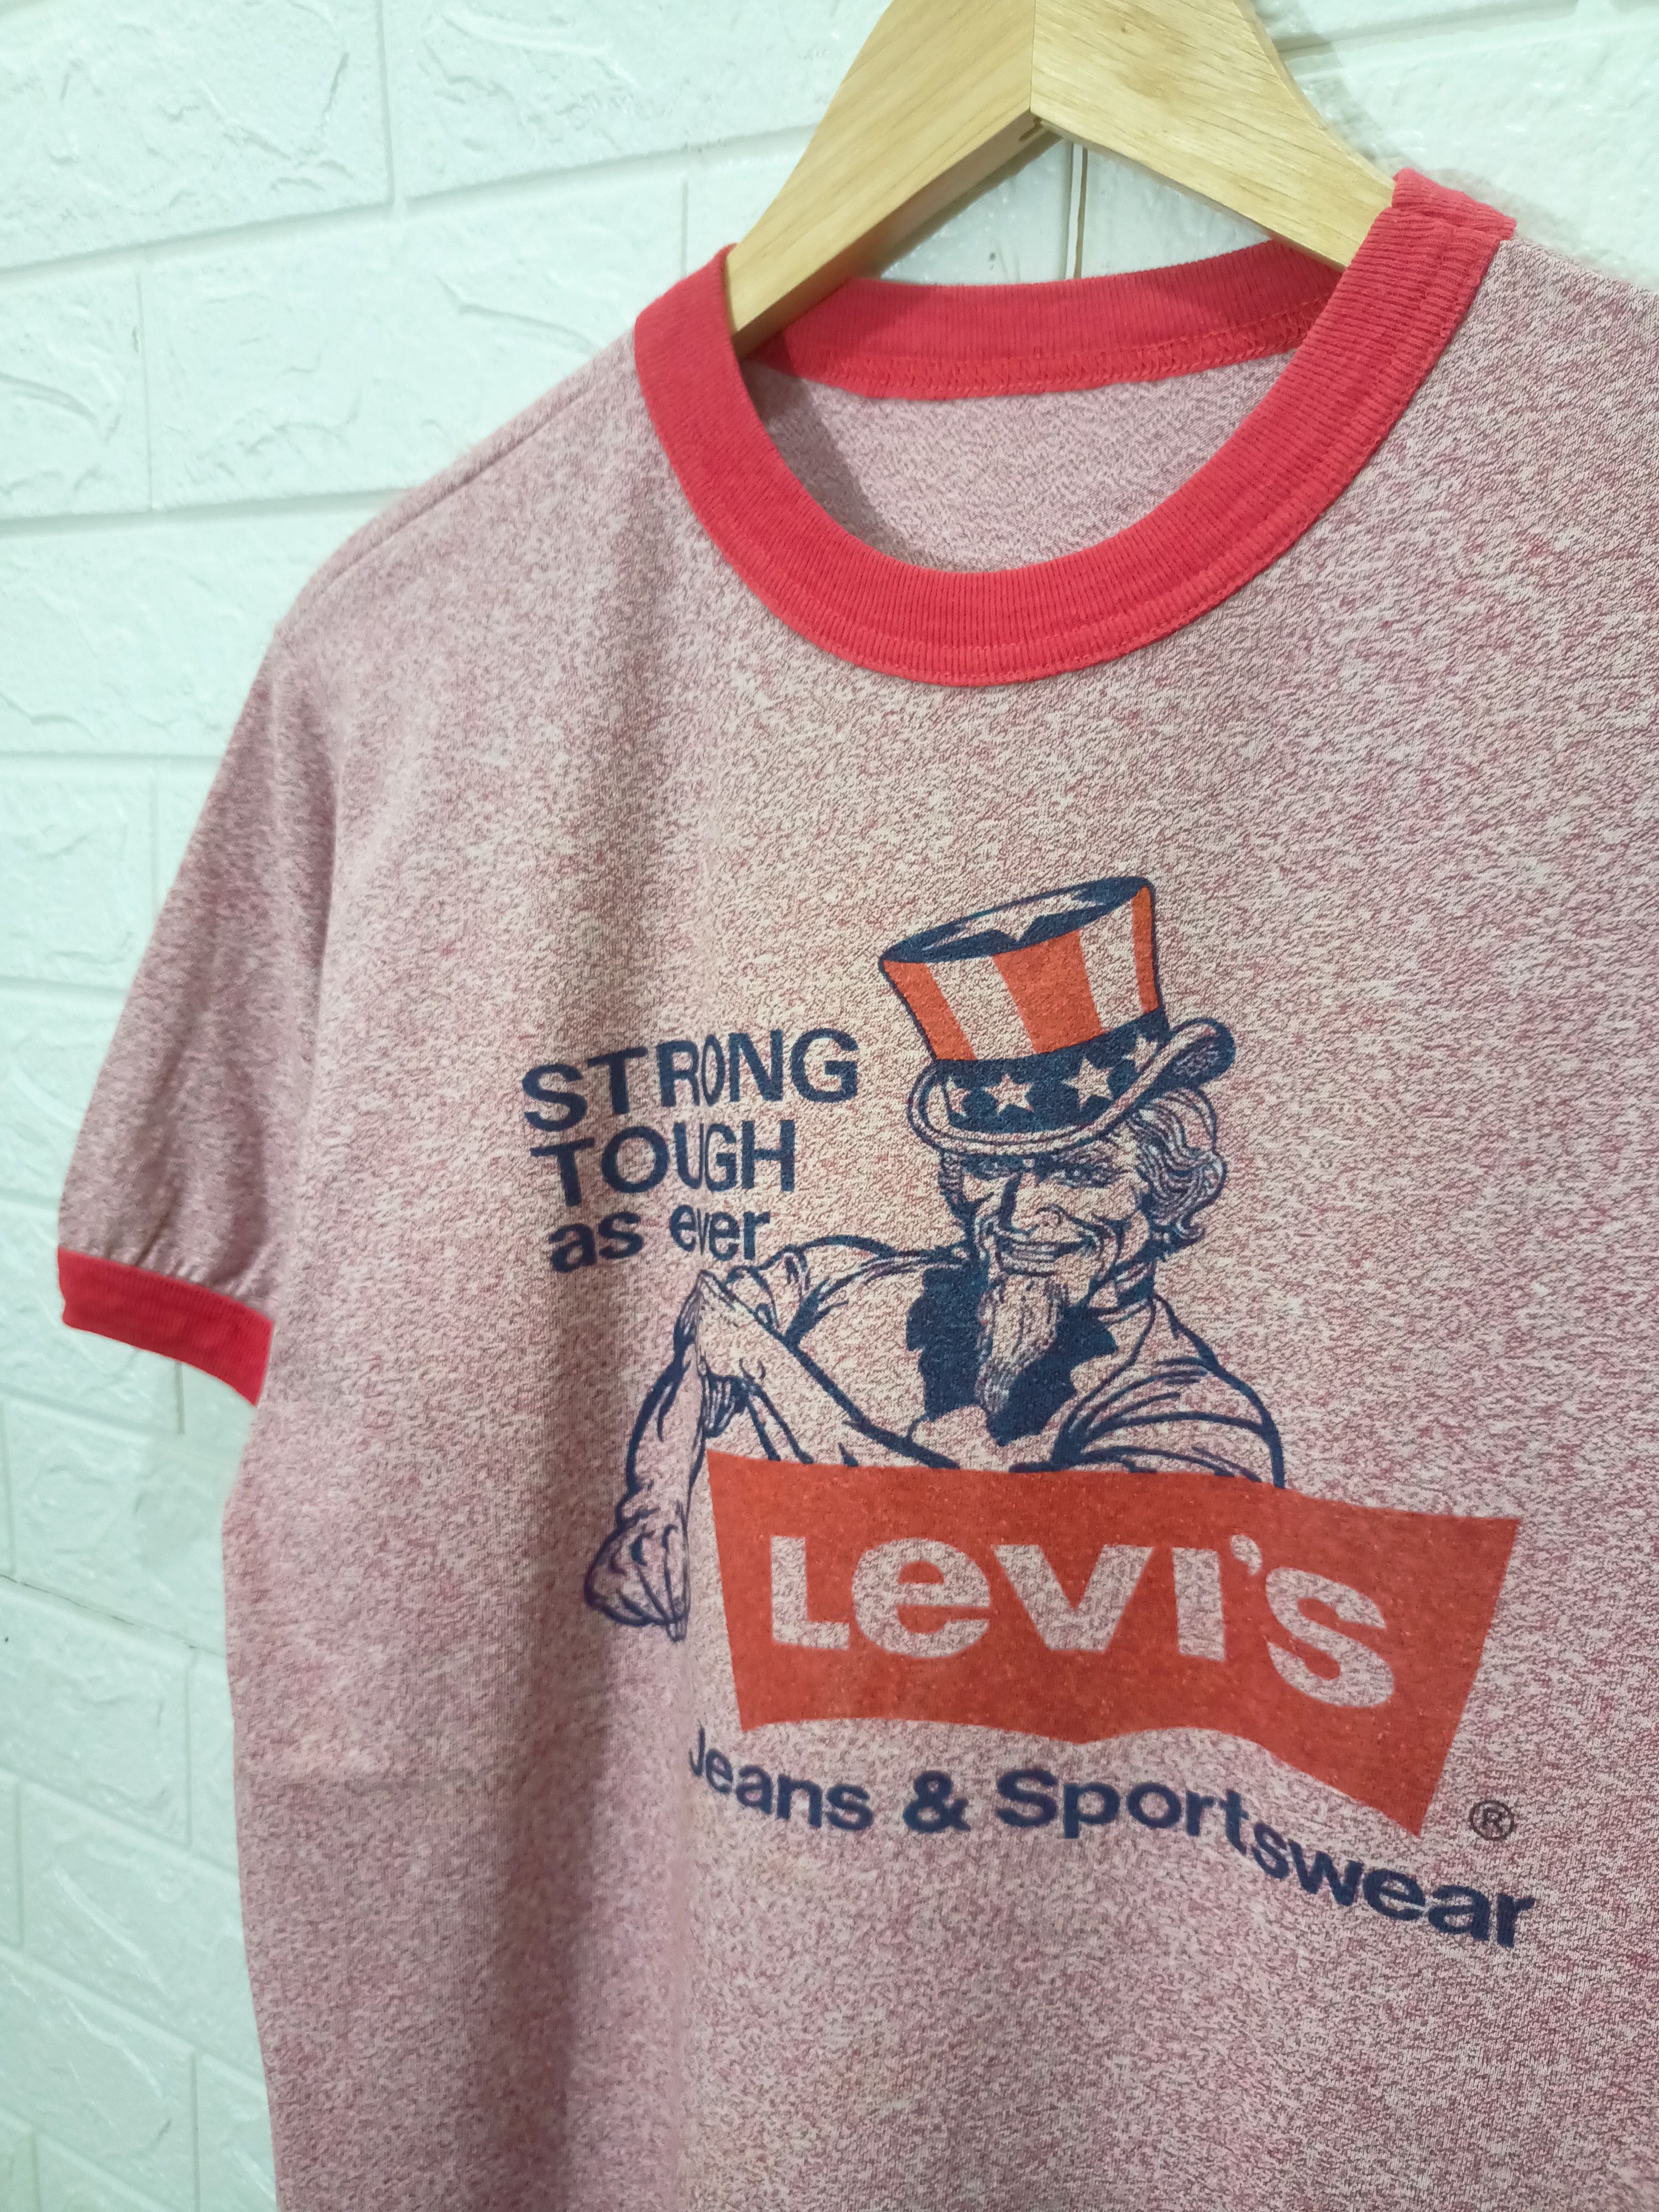 Rare Vintage 80s LEVIS Uncle Sam Strong Tough Printed Tee - 5